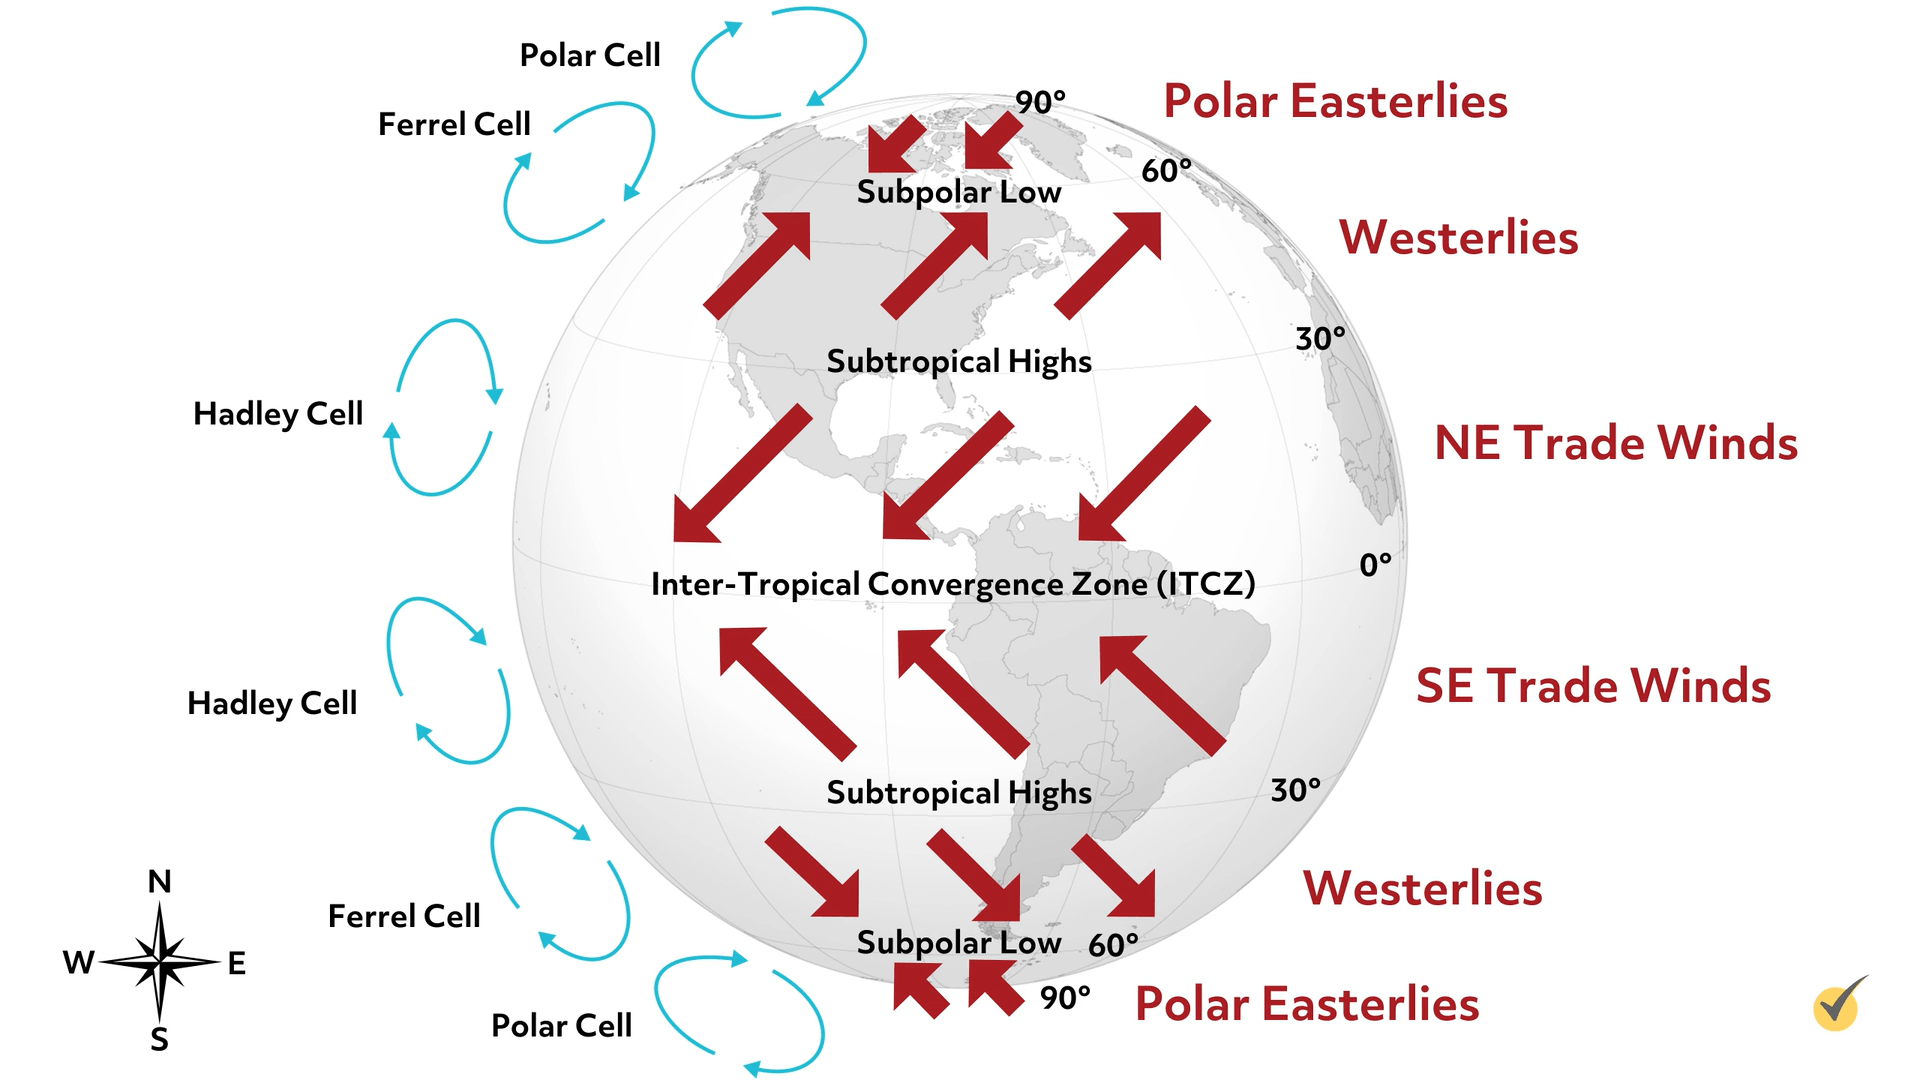 Image  of the different types of wind and where they are located.